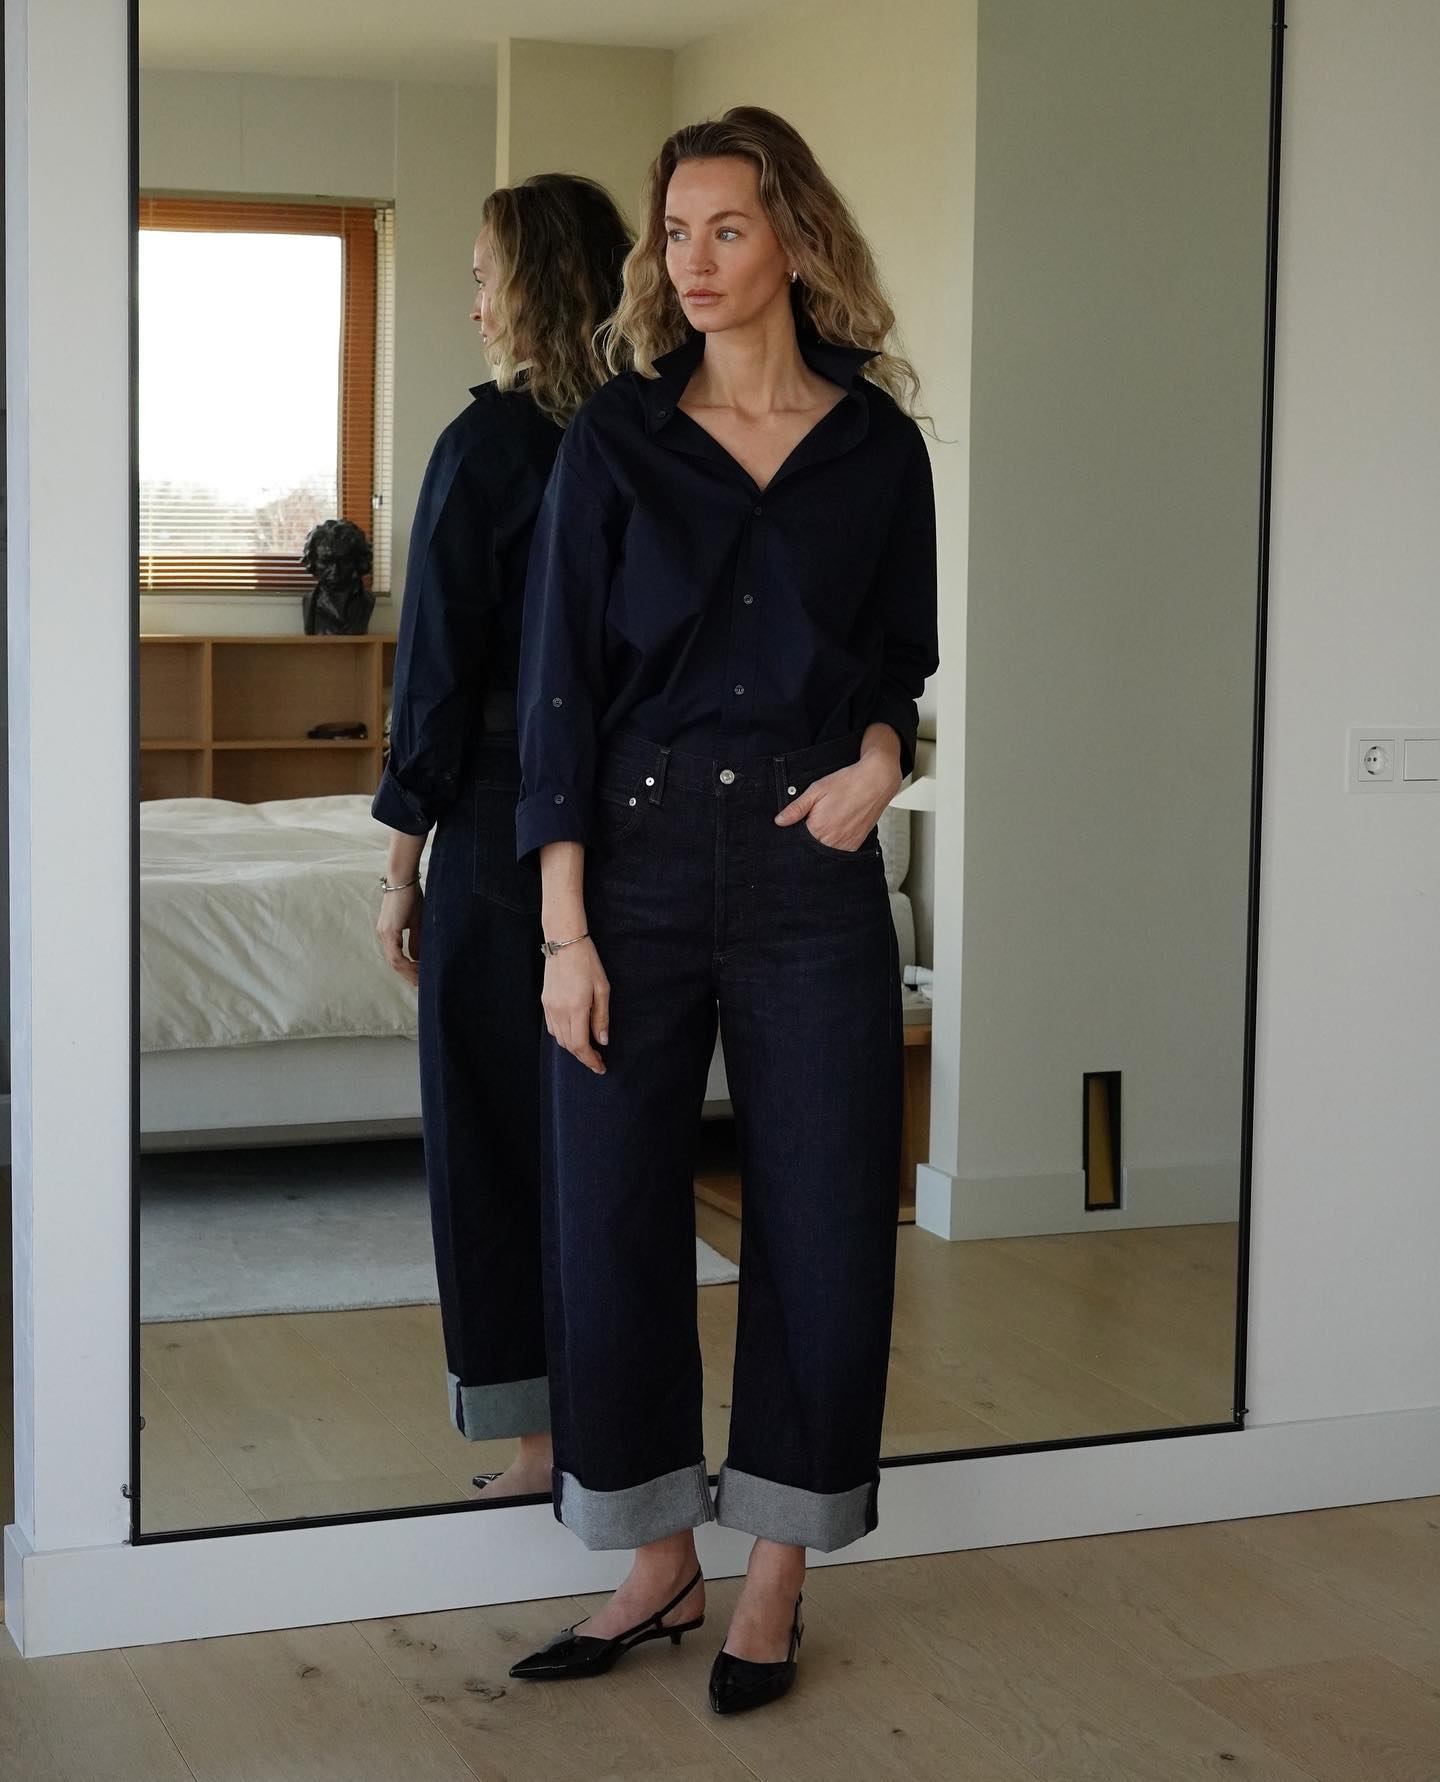 Anouk Yve 13 Stylish Outfit Ideas With Cuffed Jeans Citizens of Humanity Ayla  Dark Denim Slingback Heels